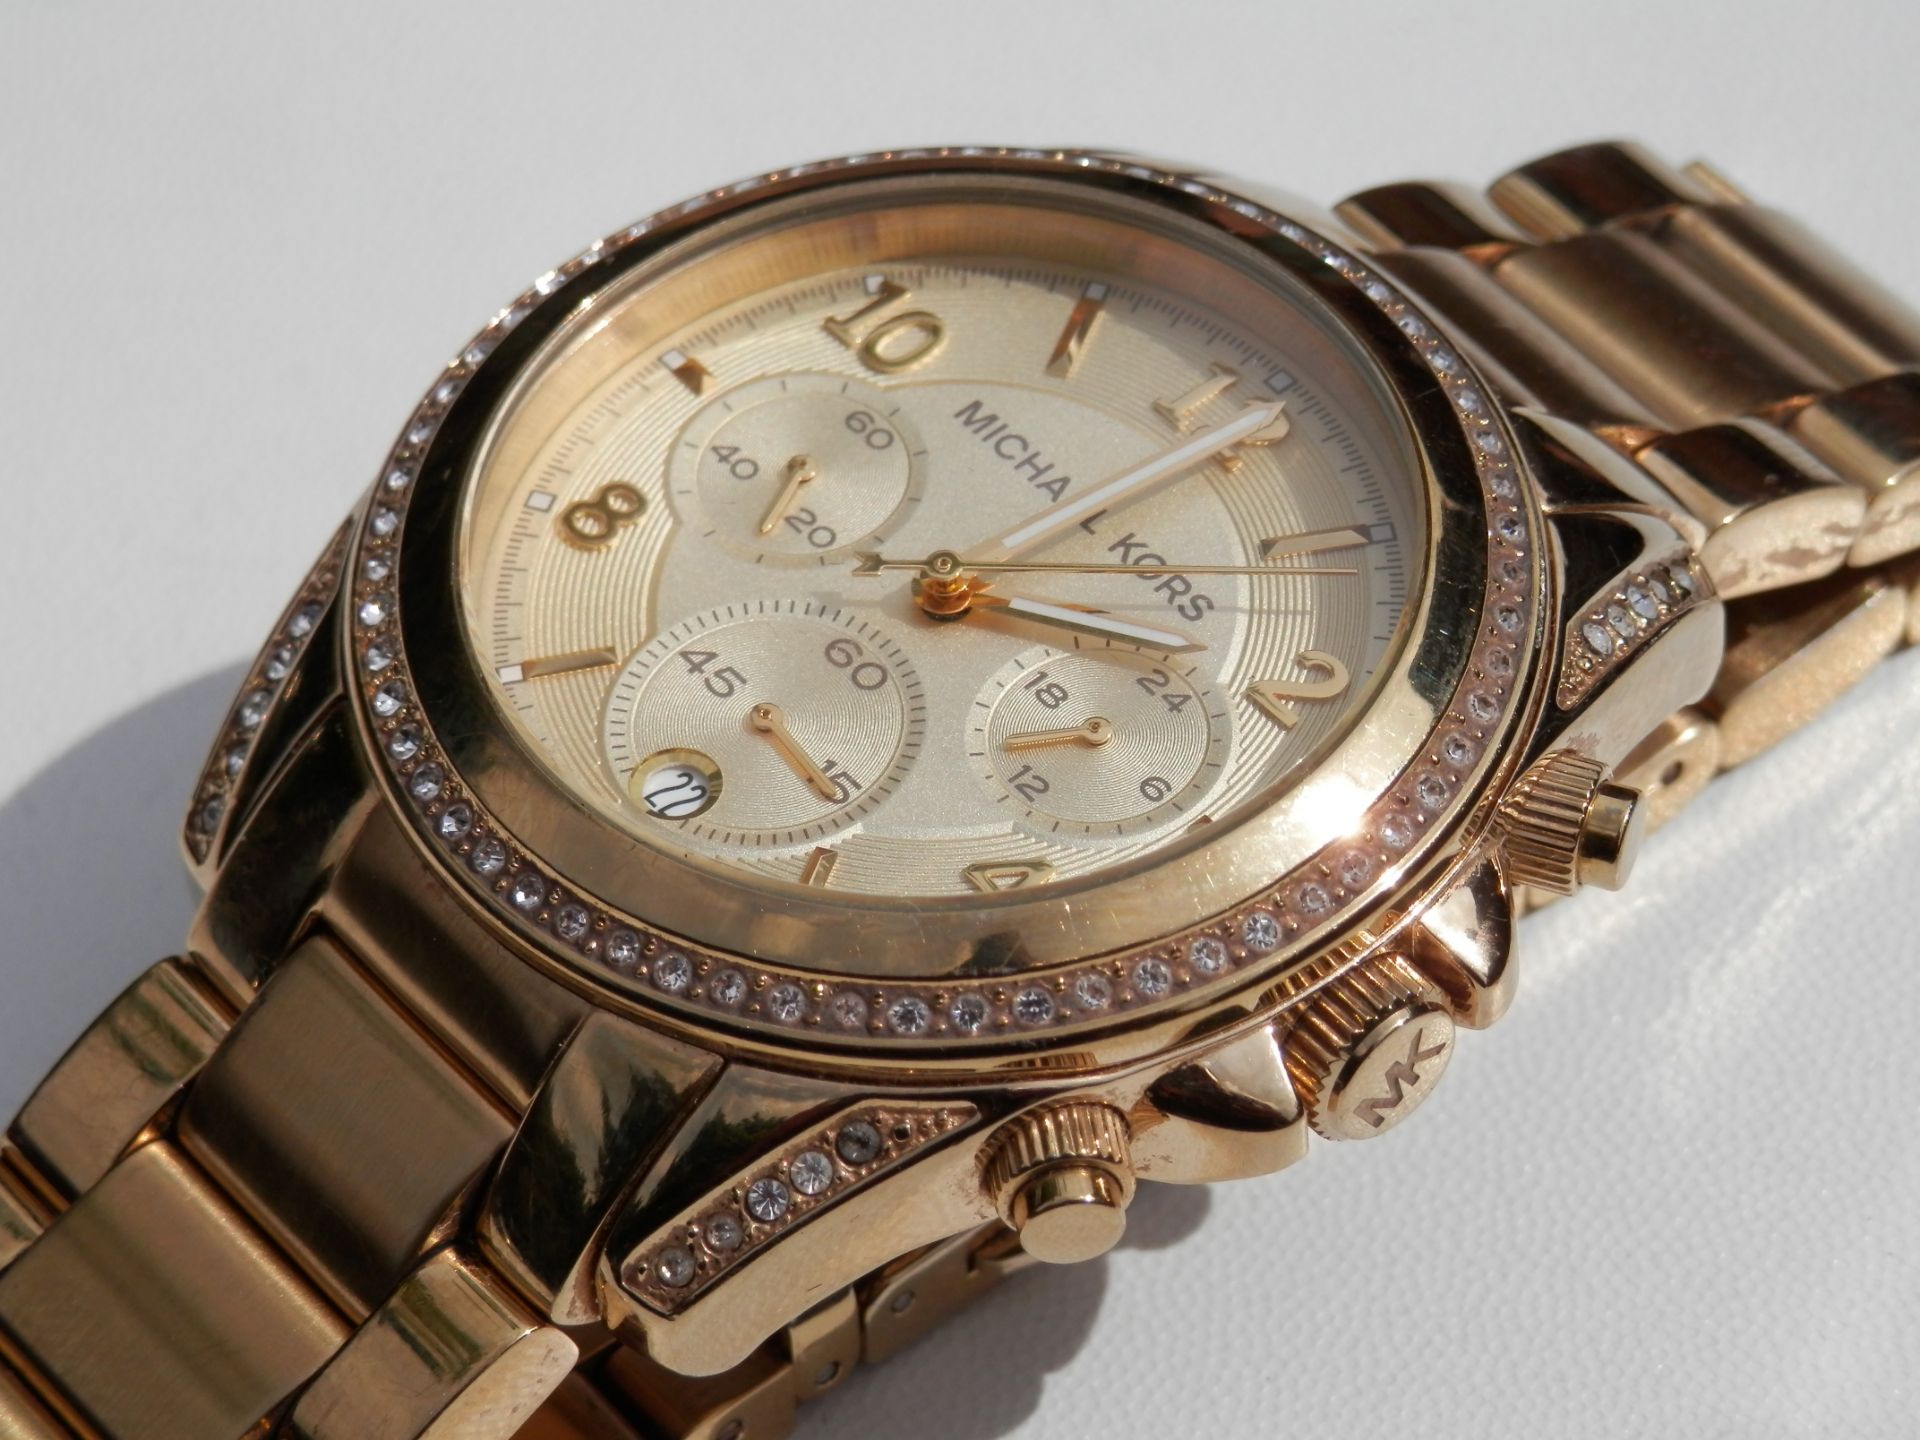 RRP £240. SUPERB LADIES MICHAEL KORS FULL STAINLESS GOLD PLATED DIAMANTE ENCRUSTED CHRONO DATE WATCH - Image 7 of 16